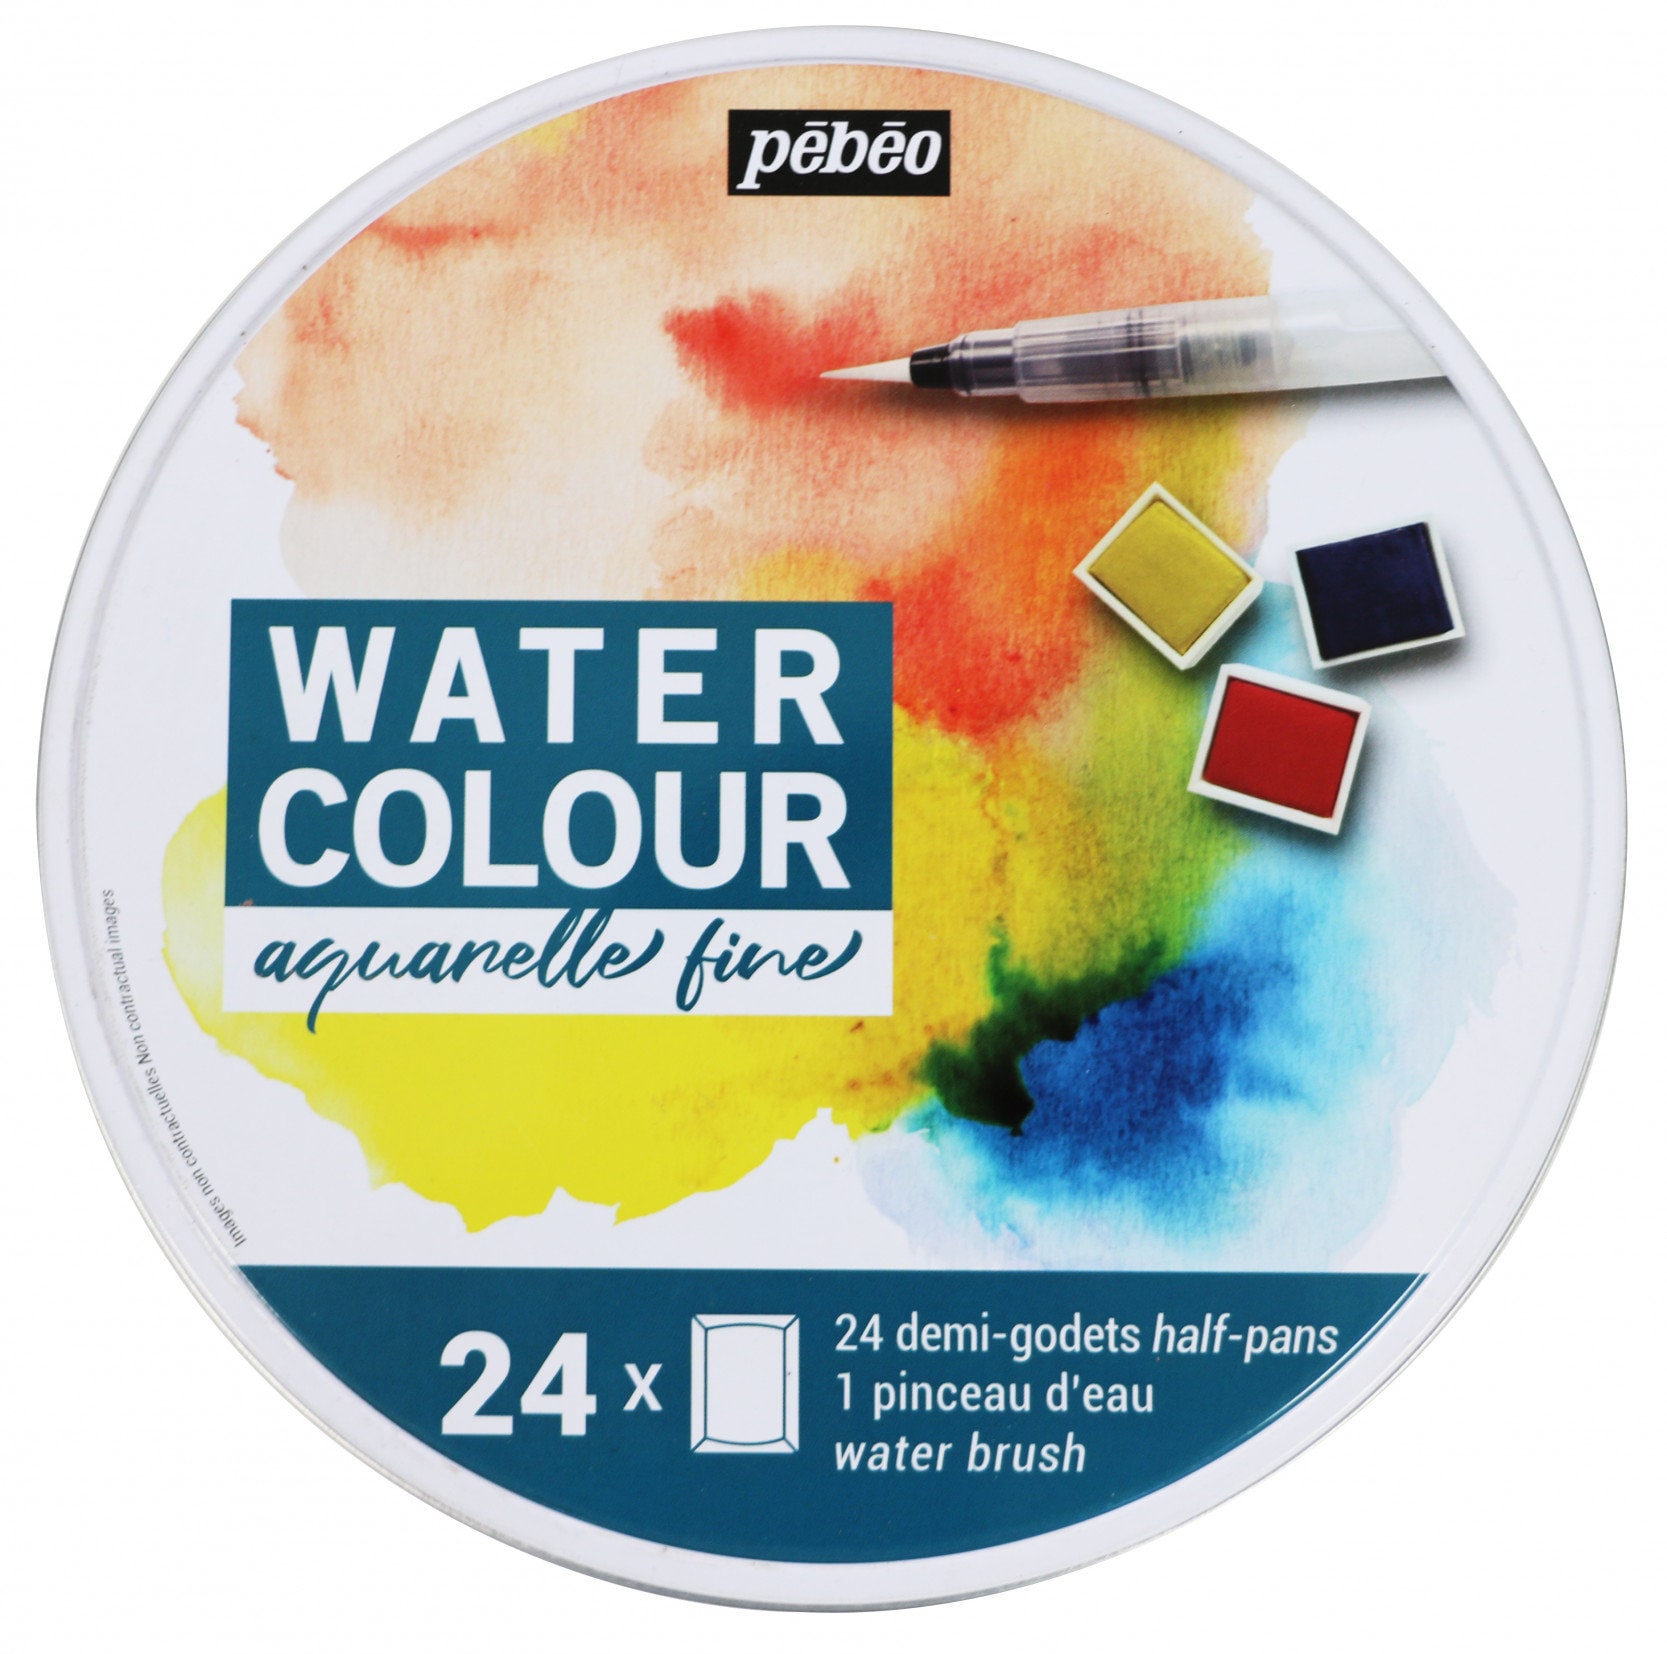 Pebeo Drawing Gum Synthetic Latex Free Masking Fluid in Marker Pen -   Israel